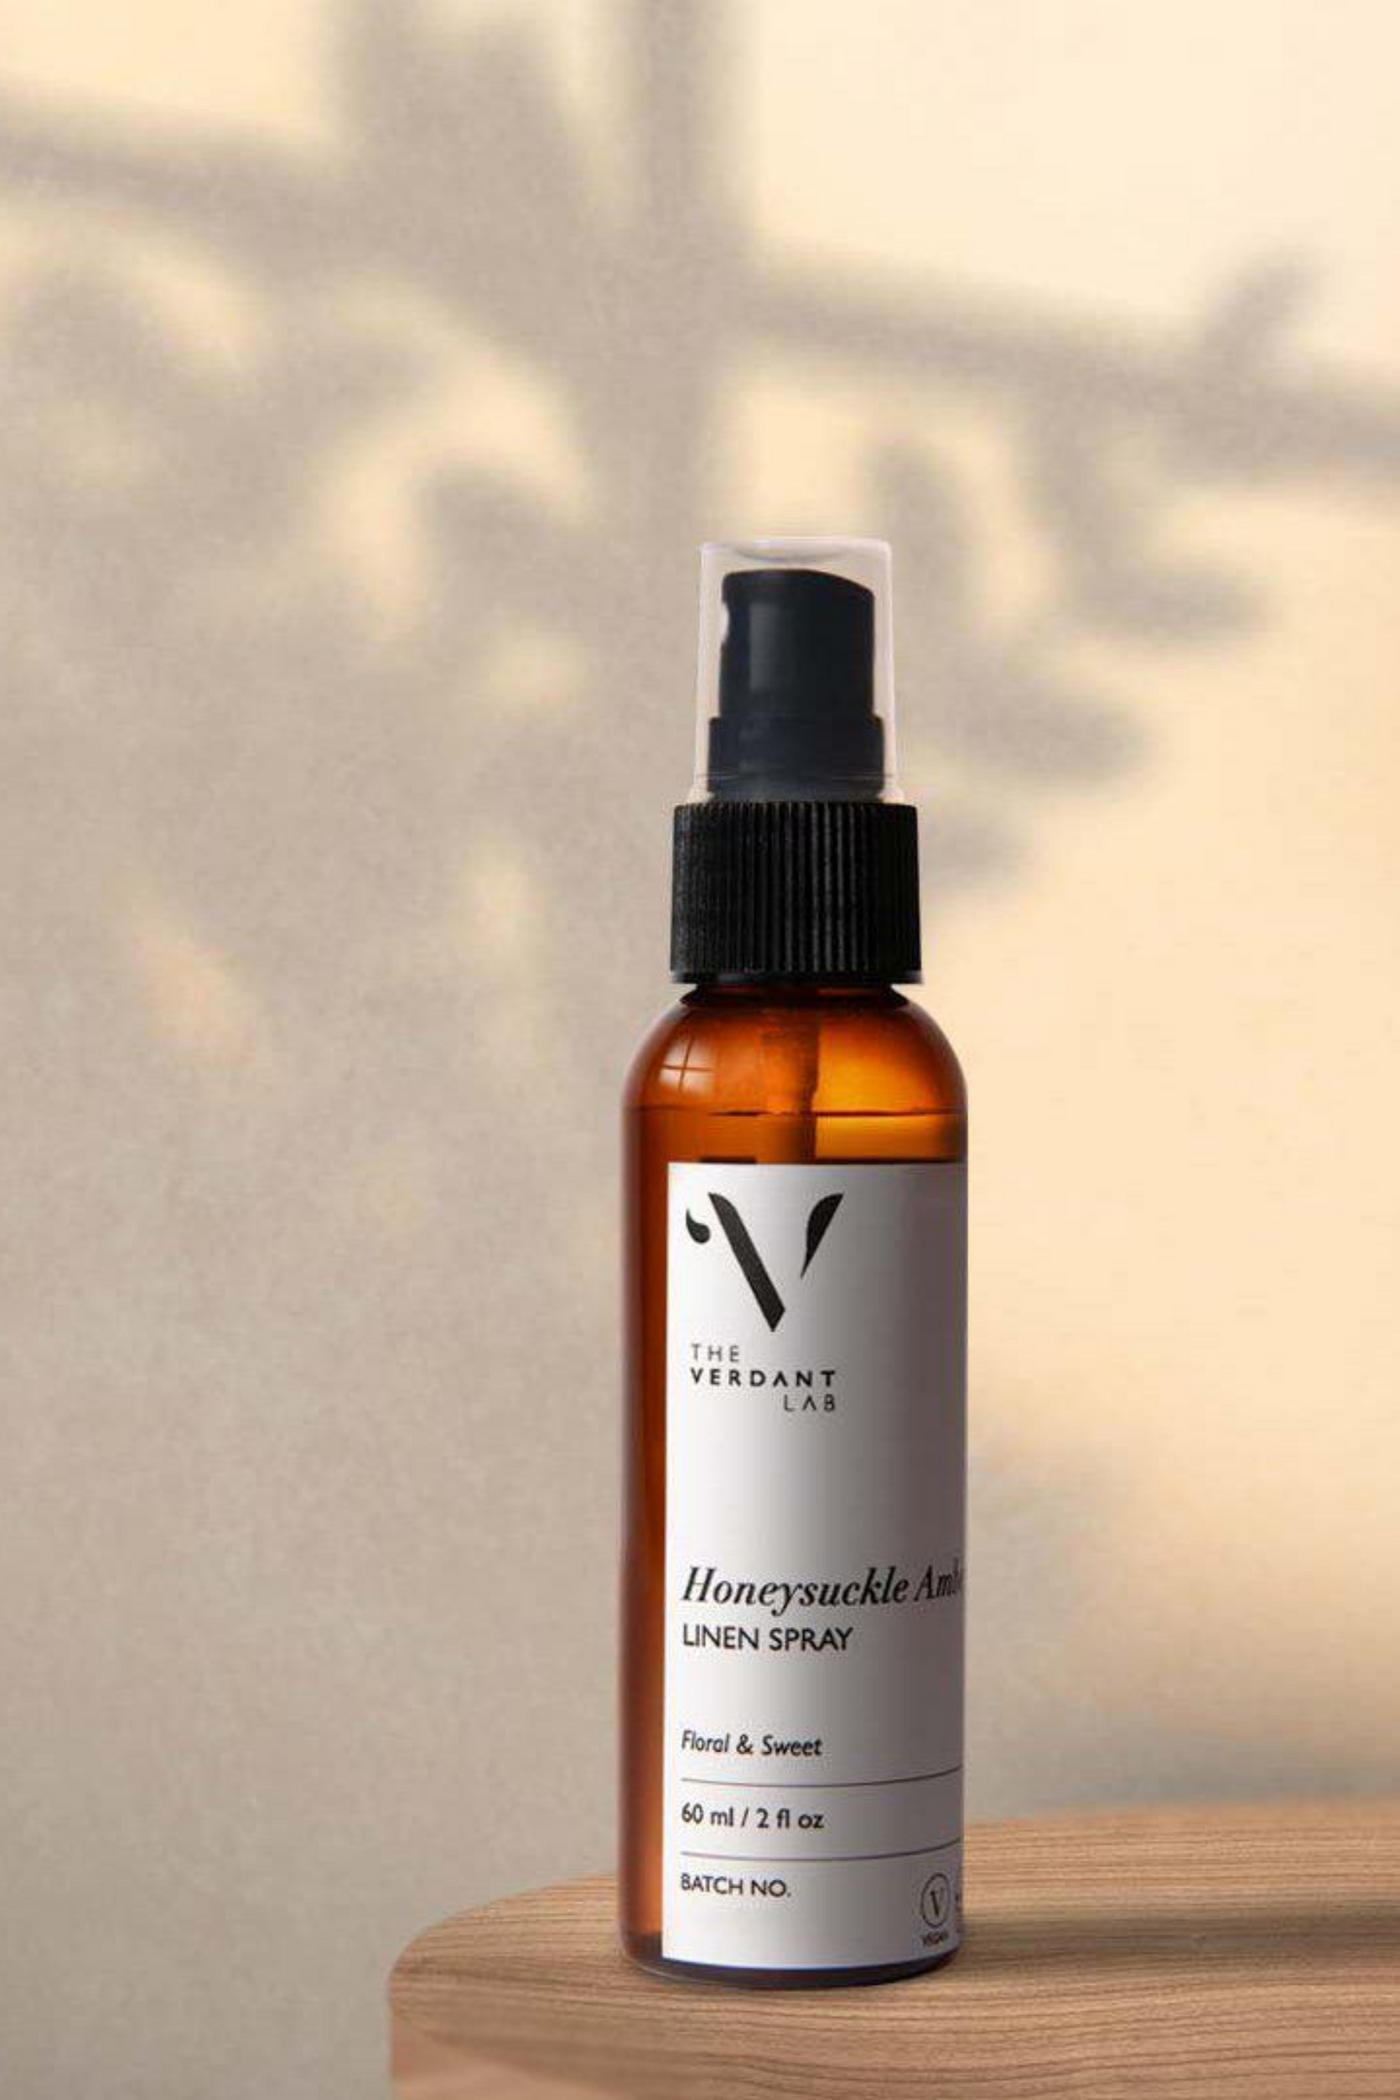 The Verdant Lab Linen Spray in Honeysuckle Amber, available on ZERRIN with free Singapore shipping above $50